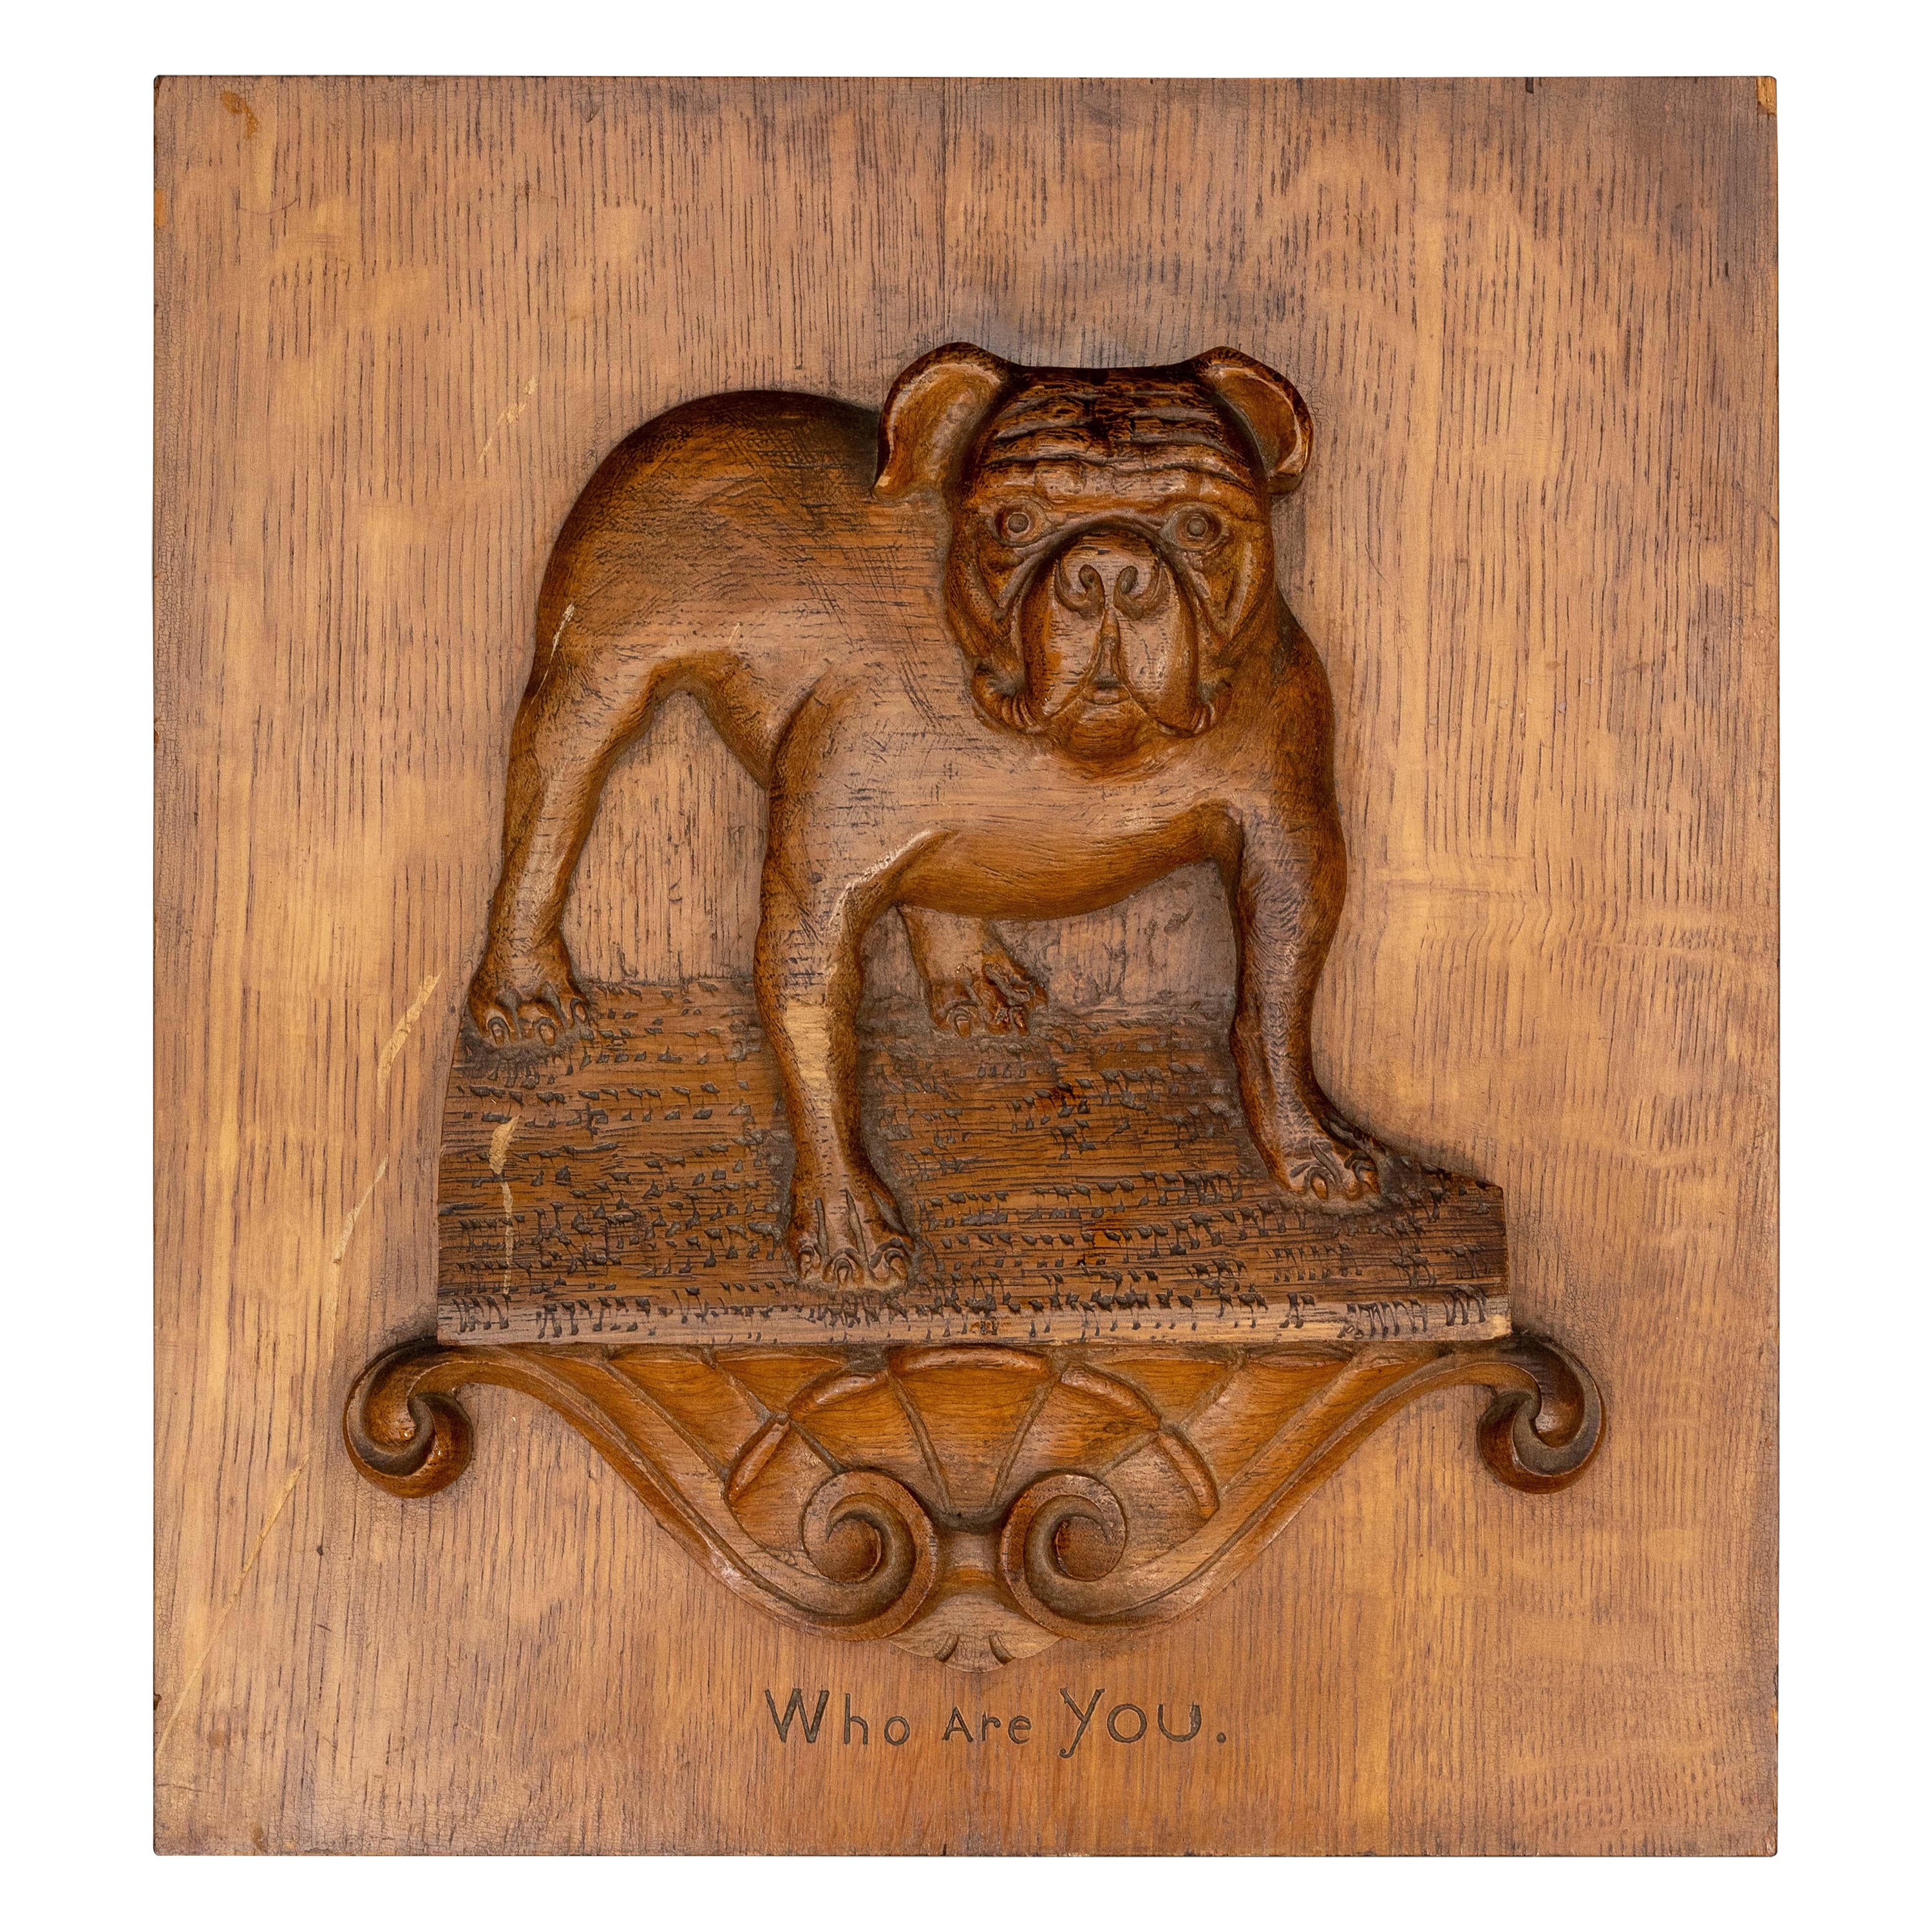 19th Century Oak Panel W/ Carved Bull Dog "Who are You"